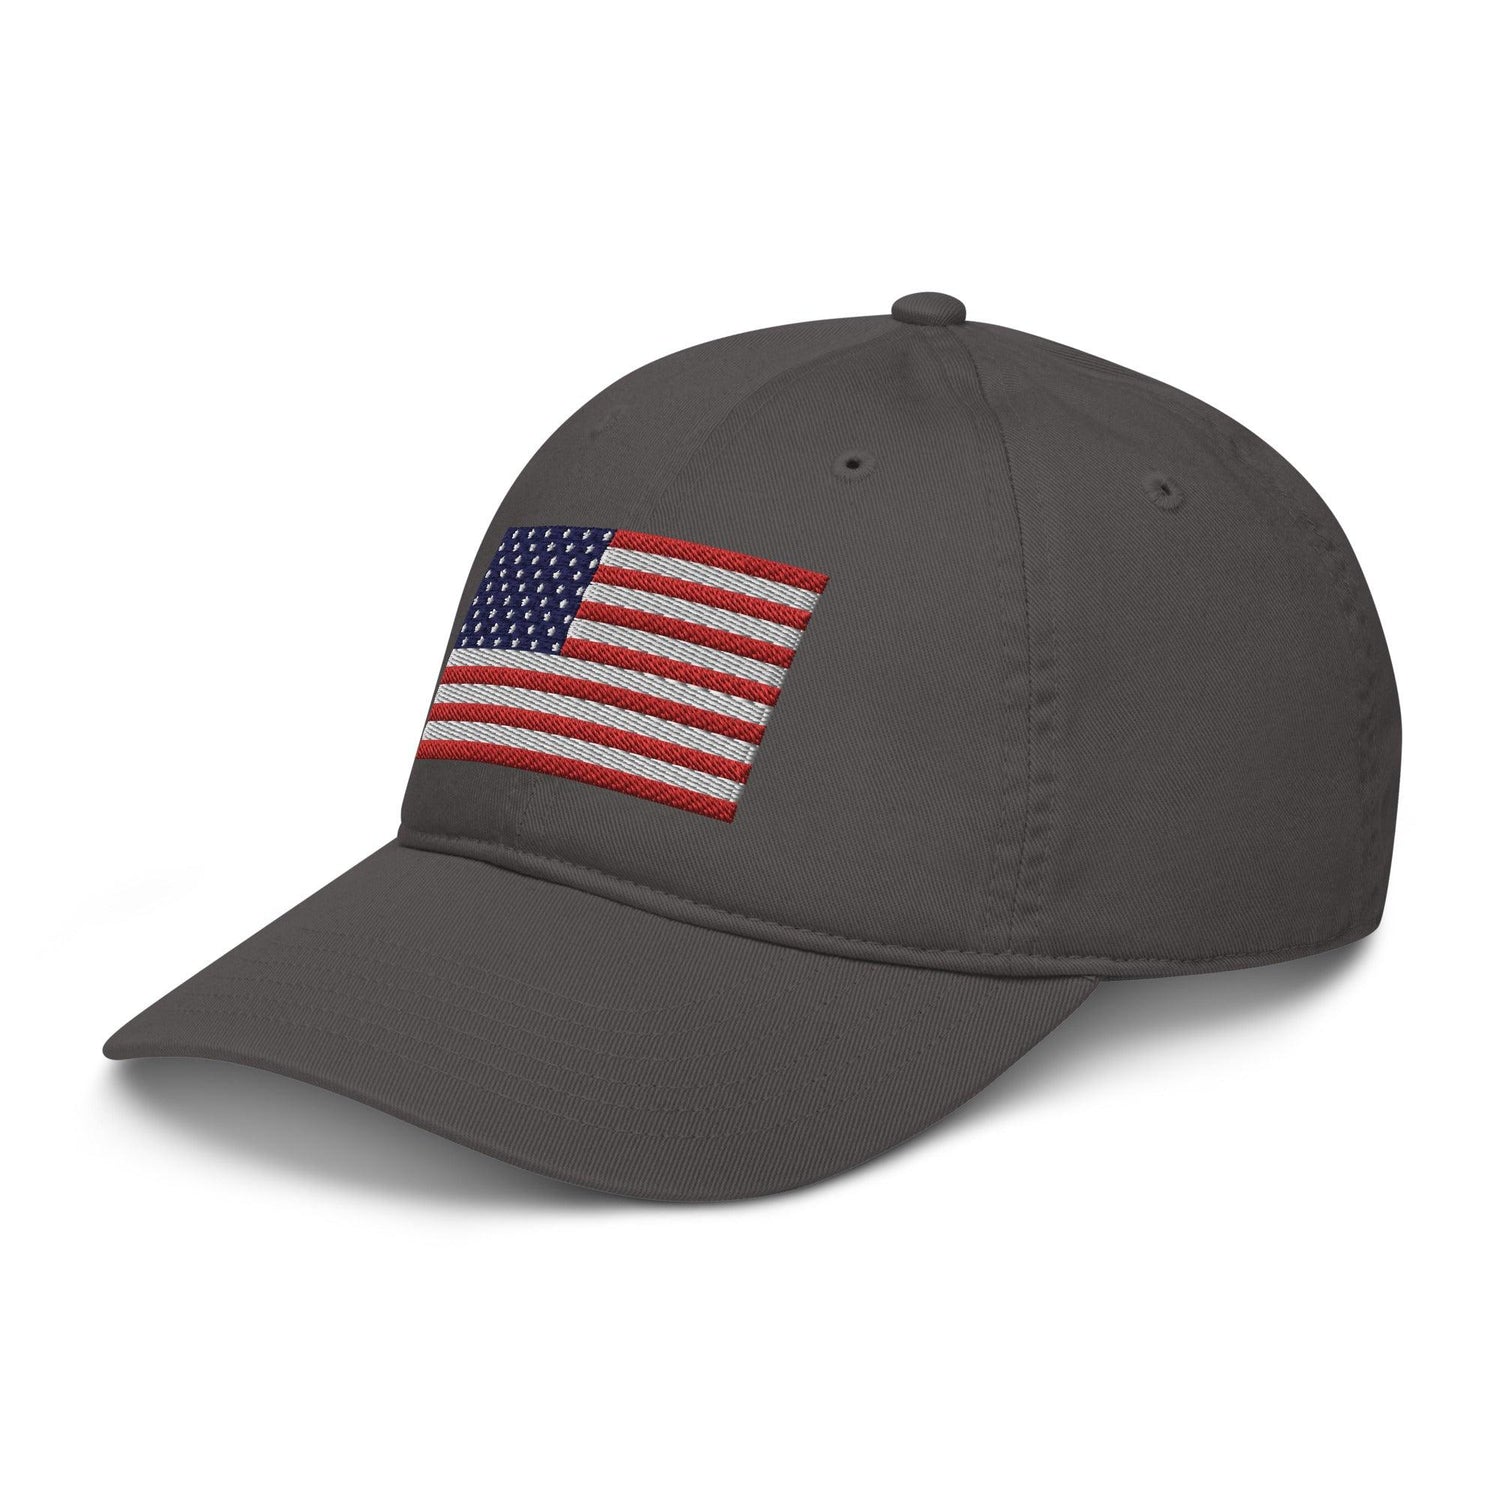 Embroidery American Flag Organic dad hat